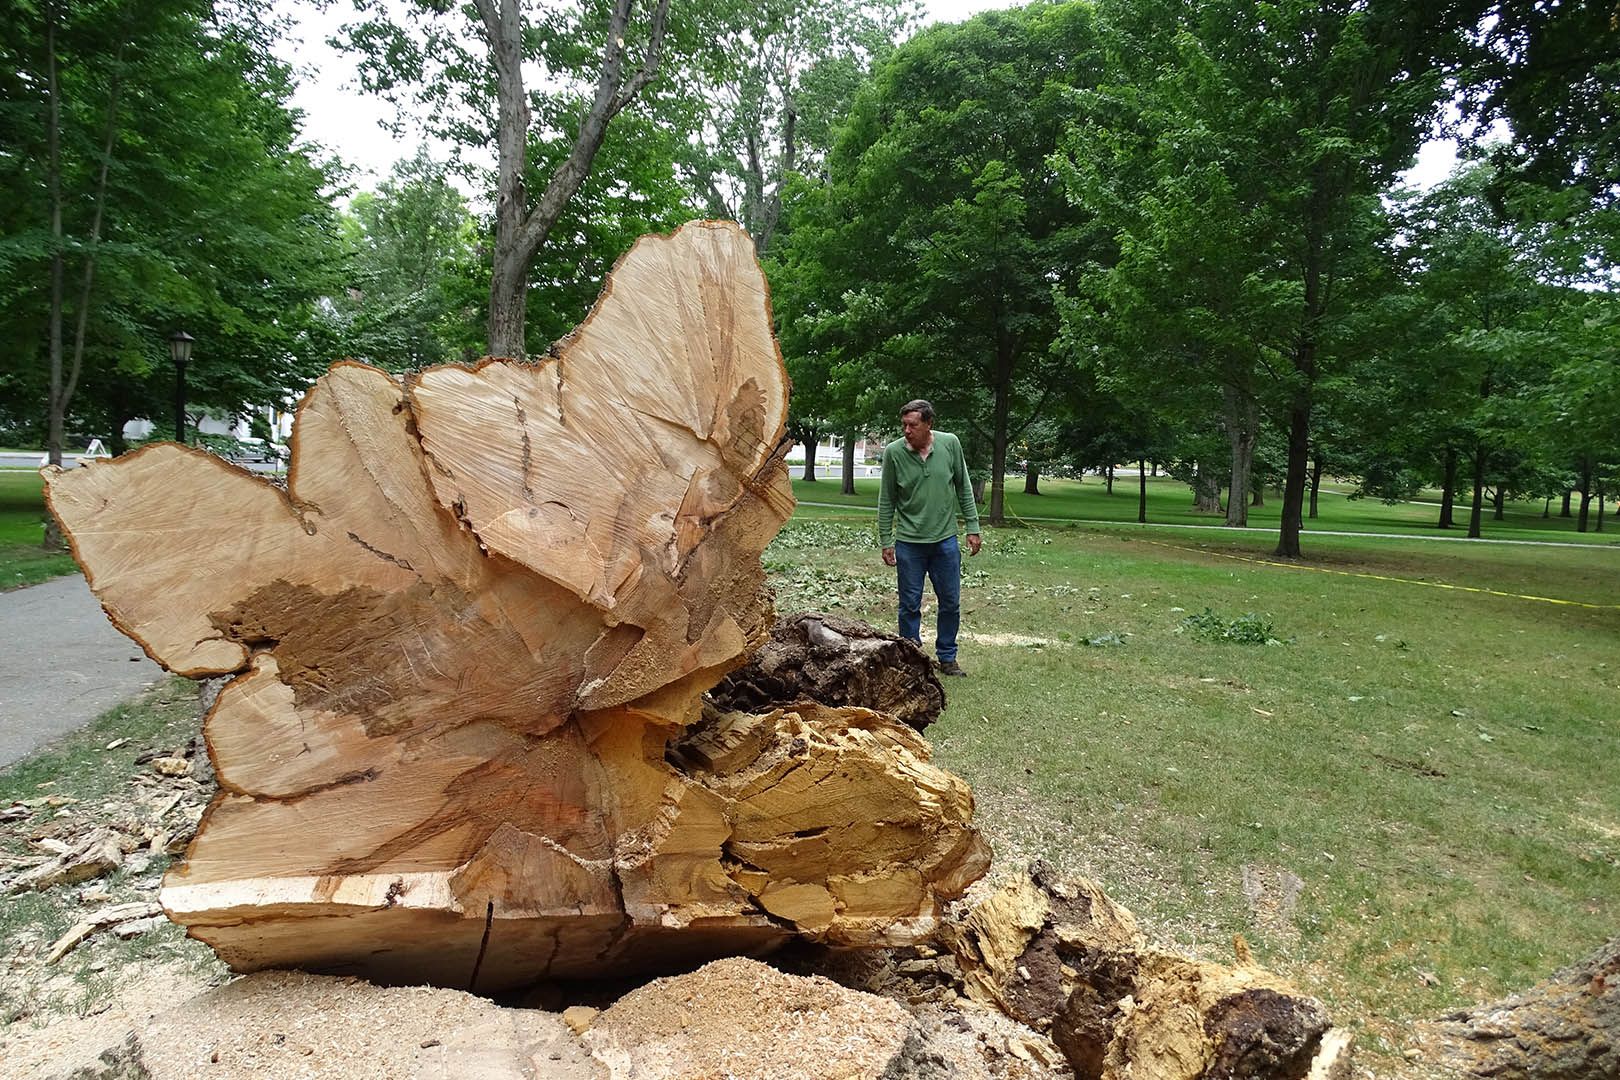 Bill Bergevin, the college's landscape architect, takes a look at the final, 20-foot section of trunk that was felled on July 29. (Jay Burns / Bates College) 